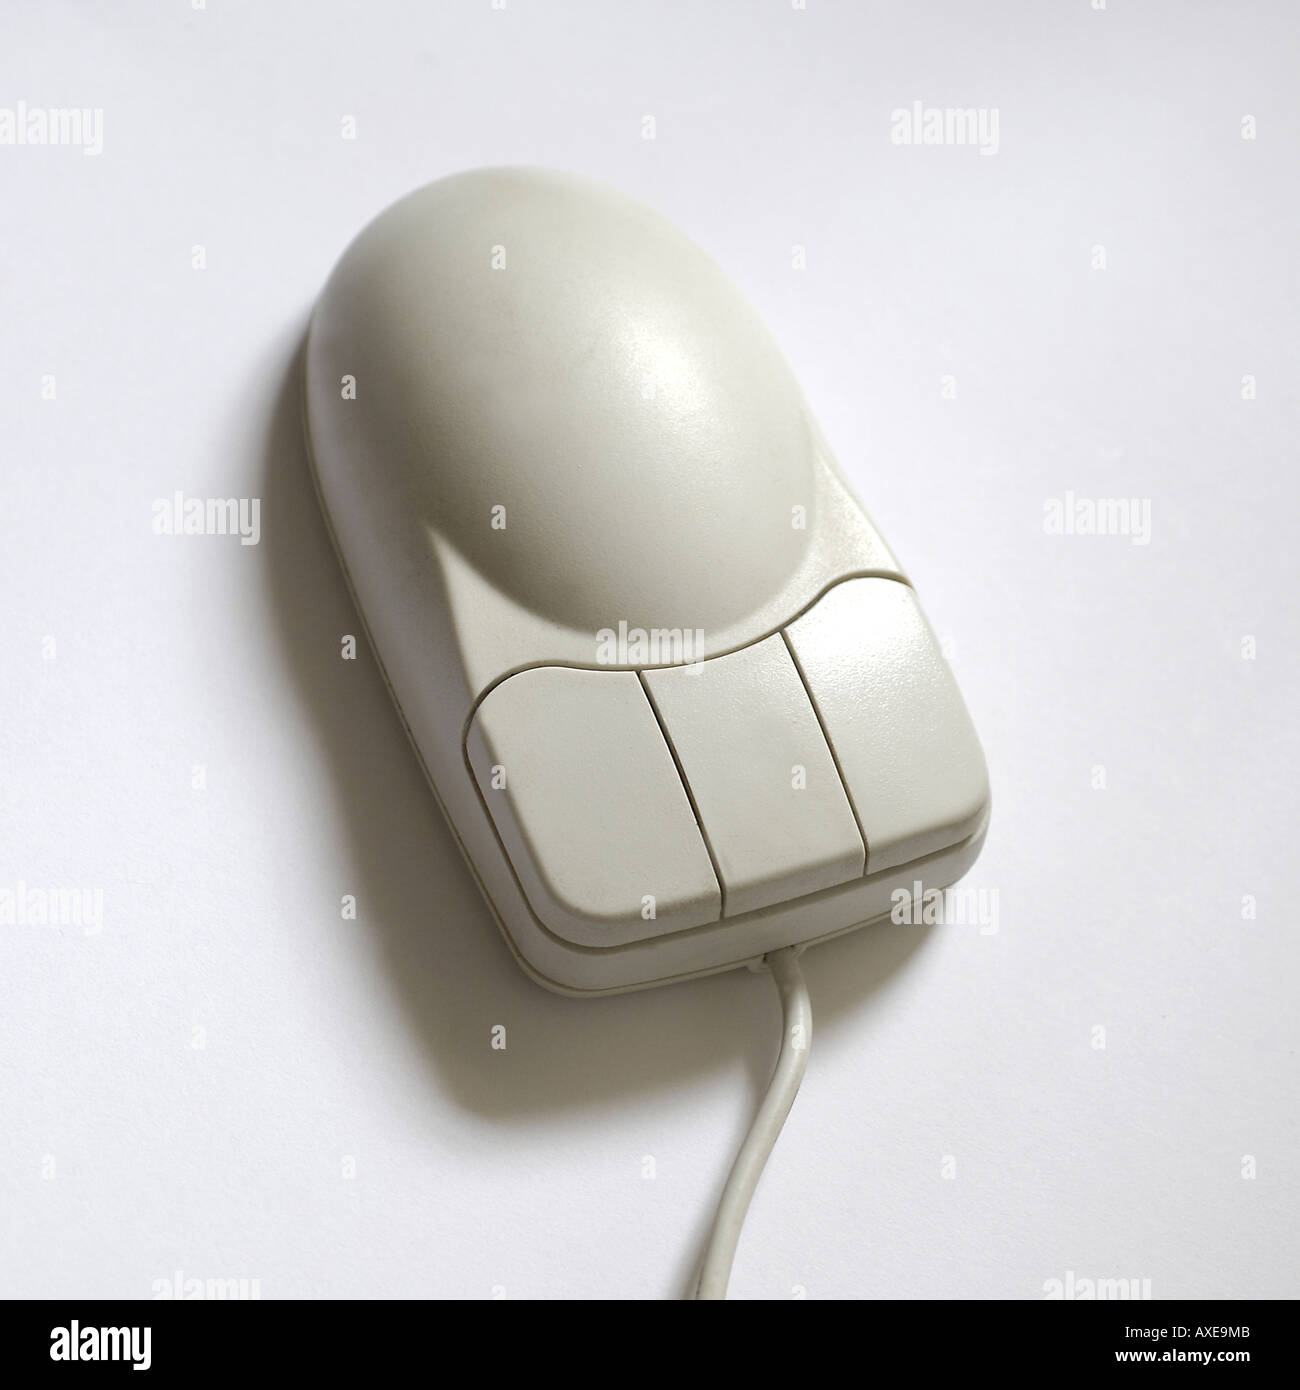 Computer mouse, 2005 Stock Photo